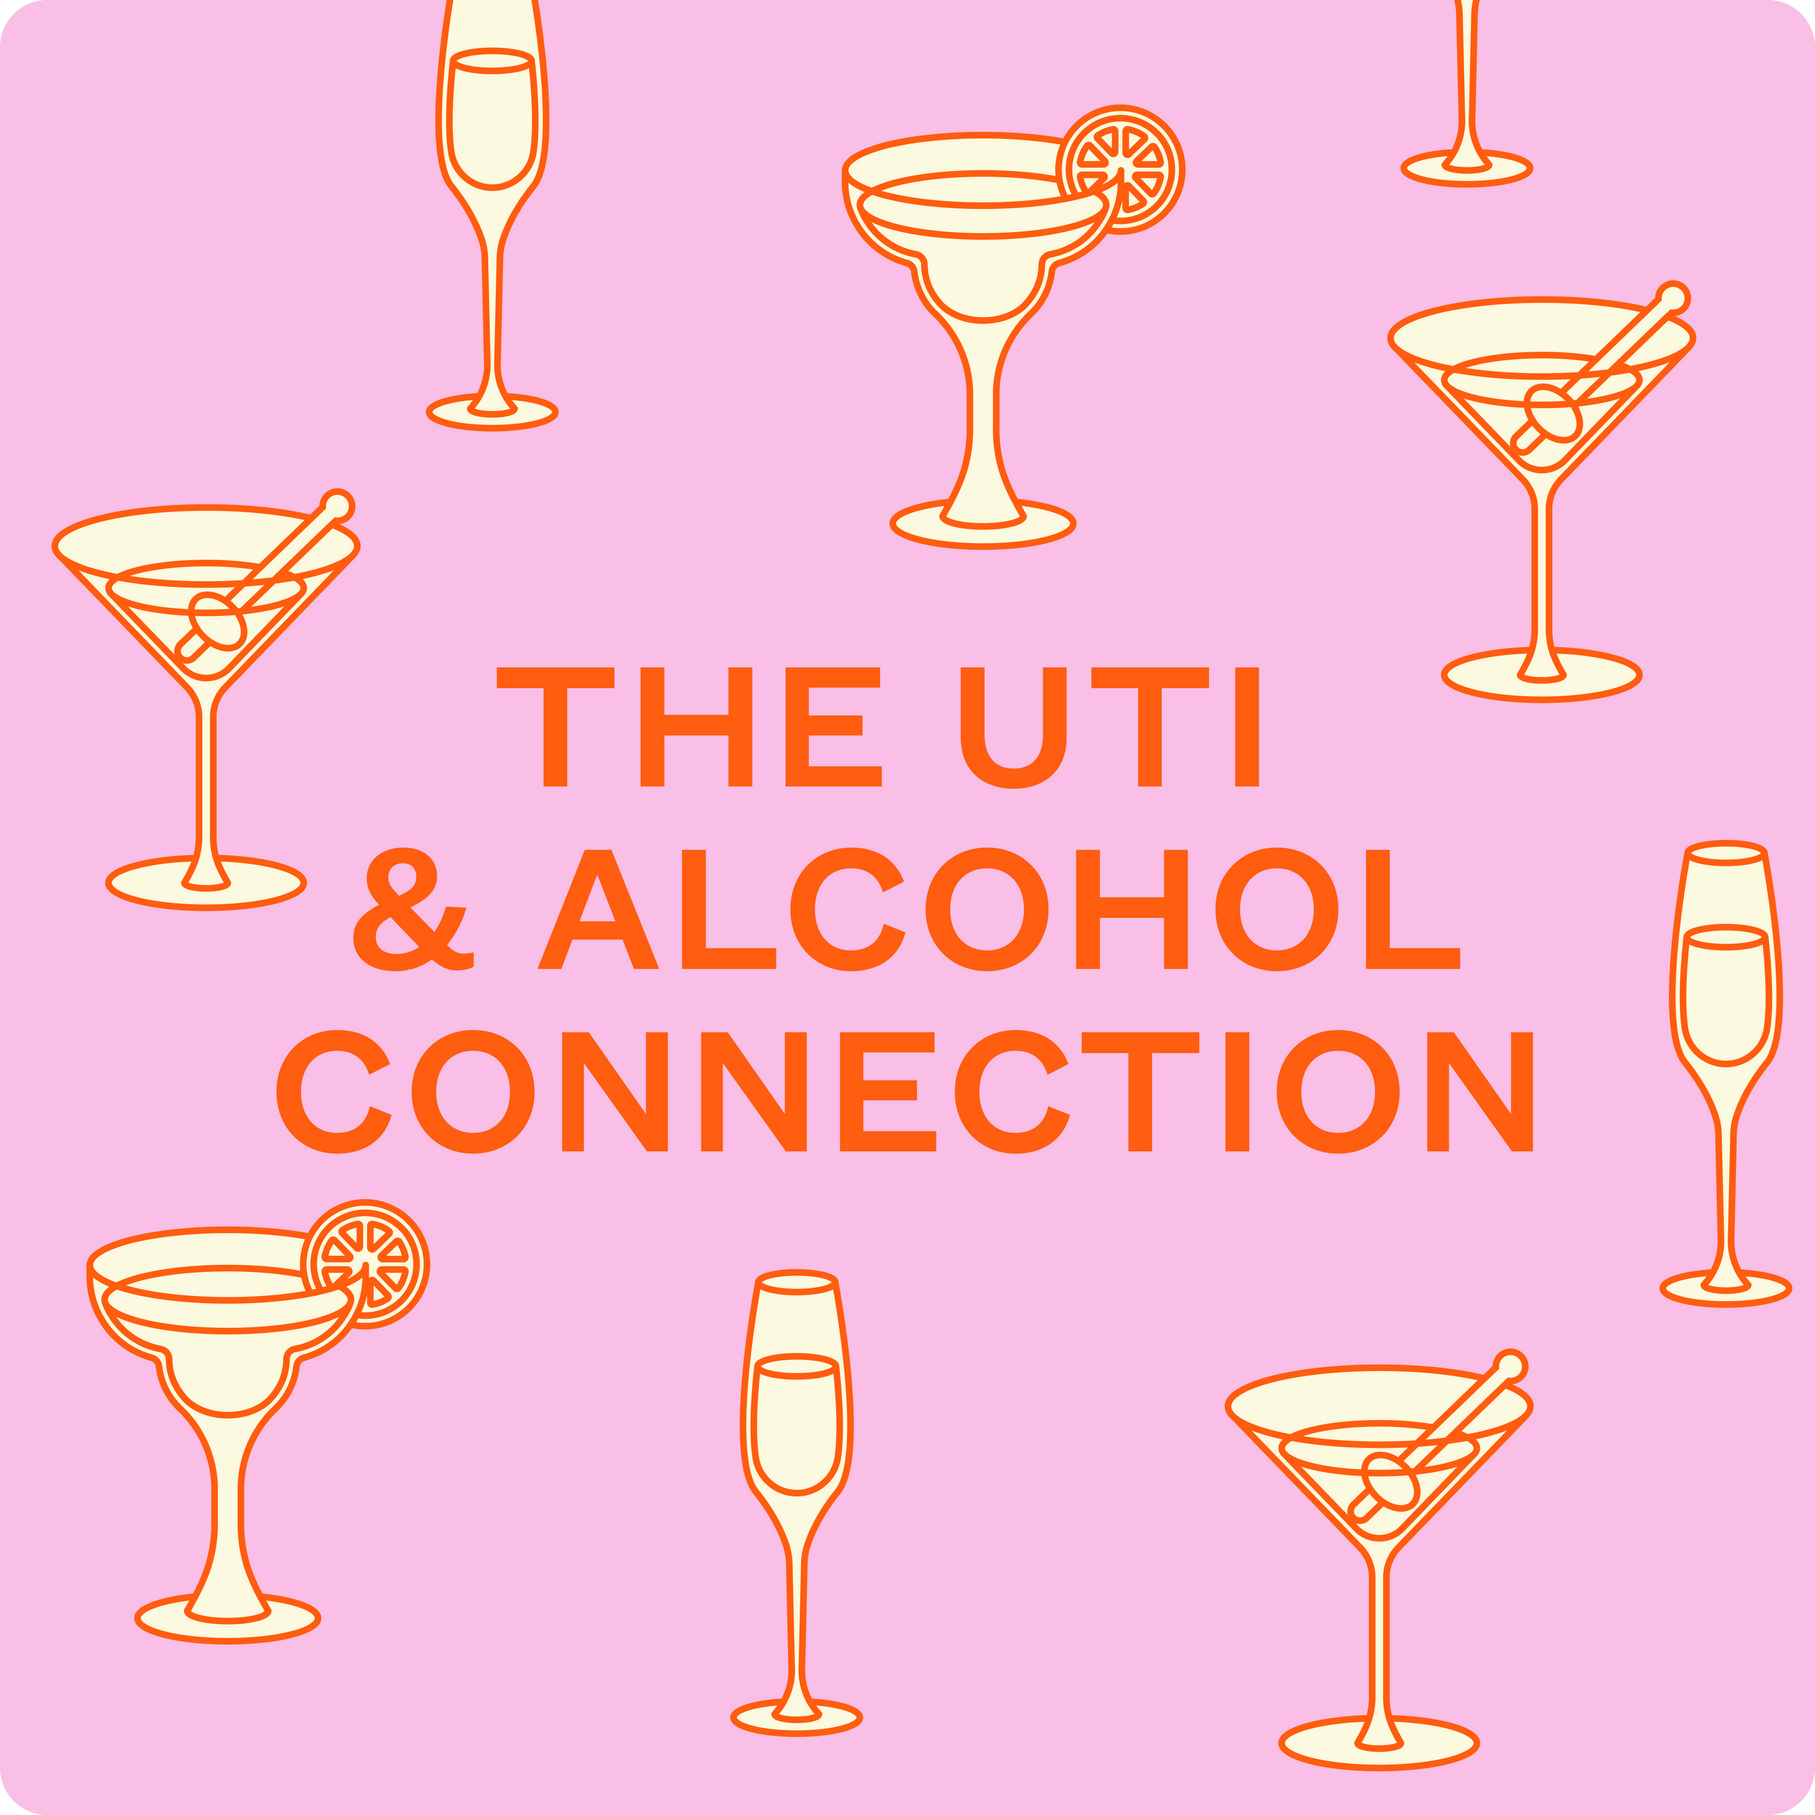 The UTI & Alcohol Connection